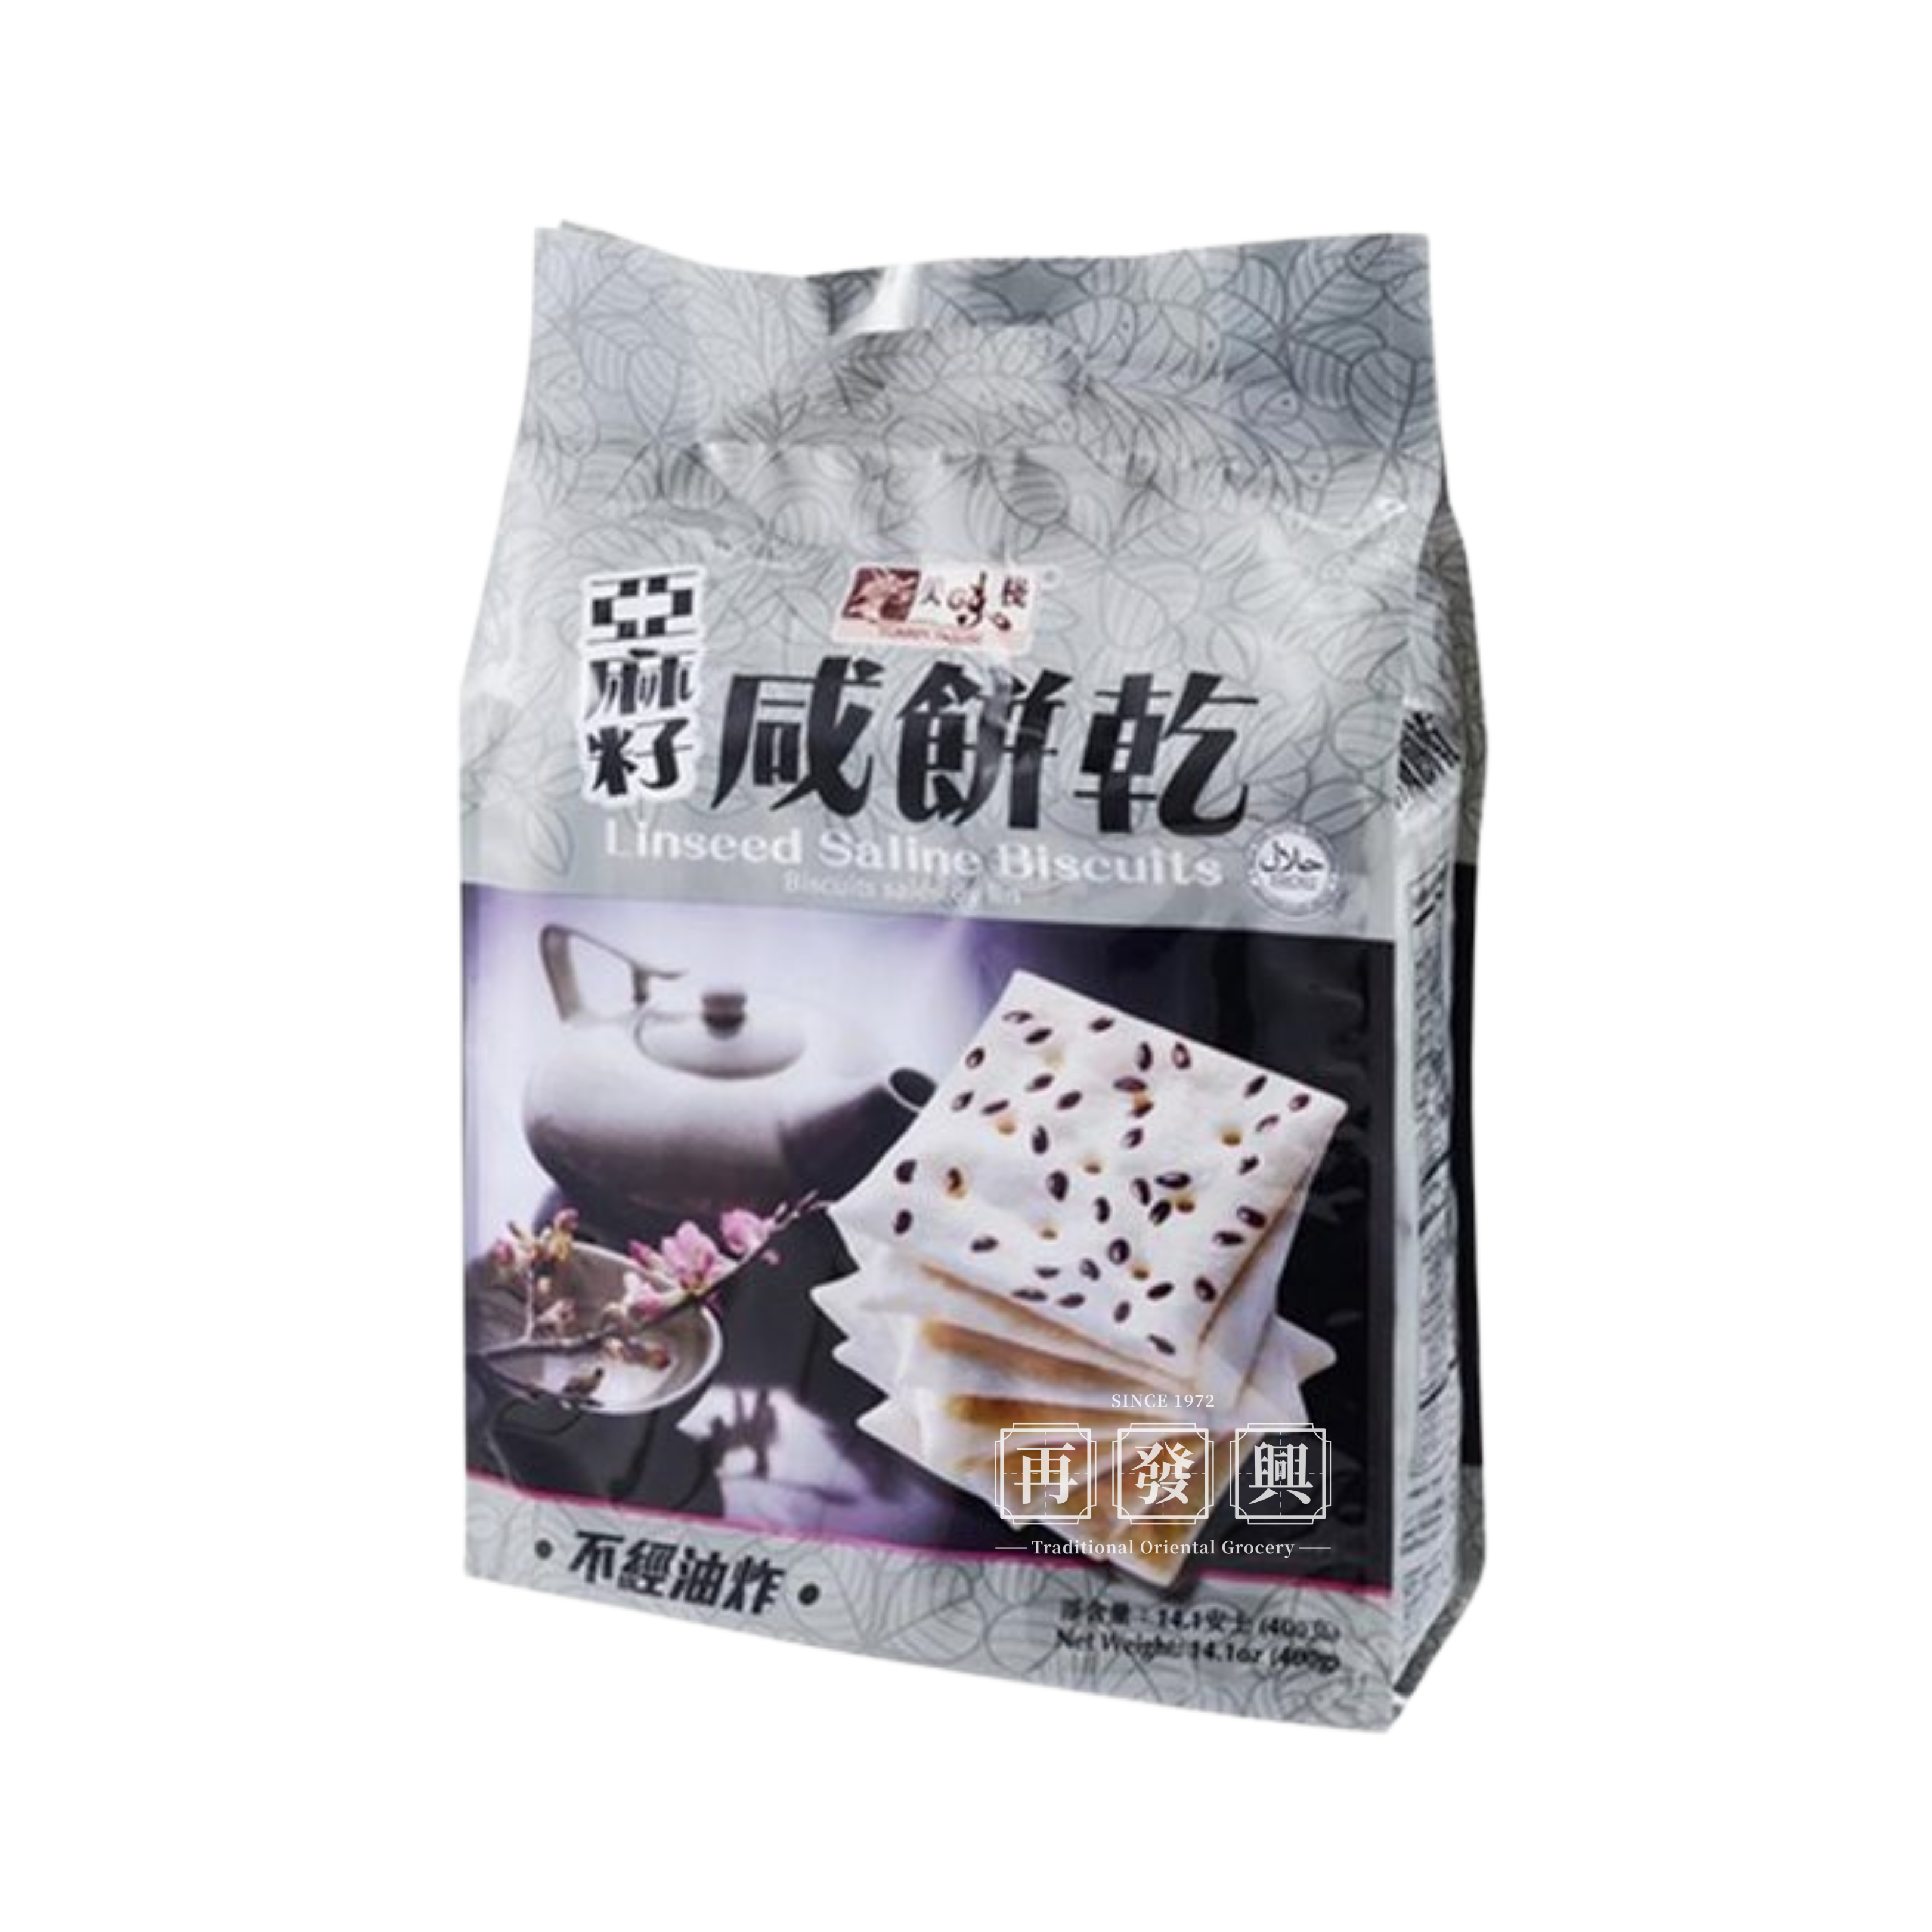 Yummy House Linseed Saline Biscuits 400g